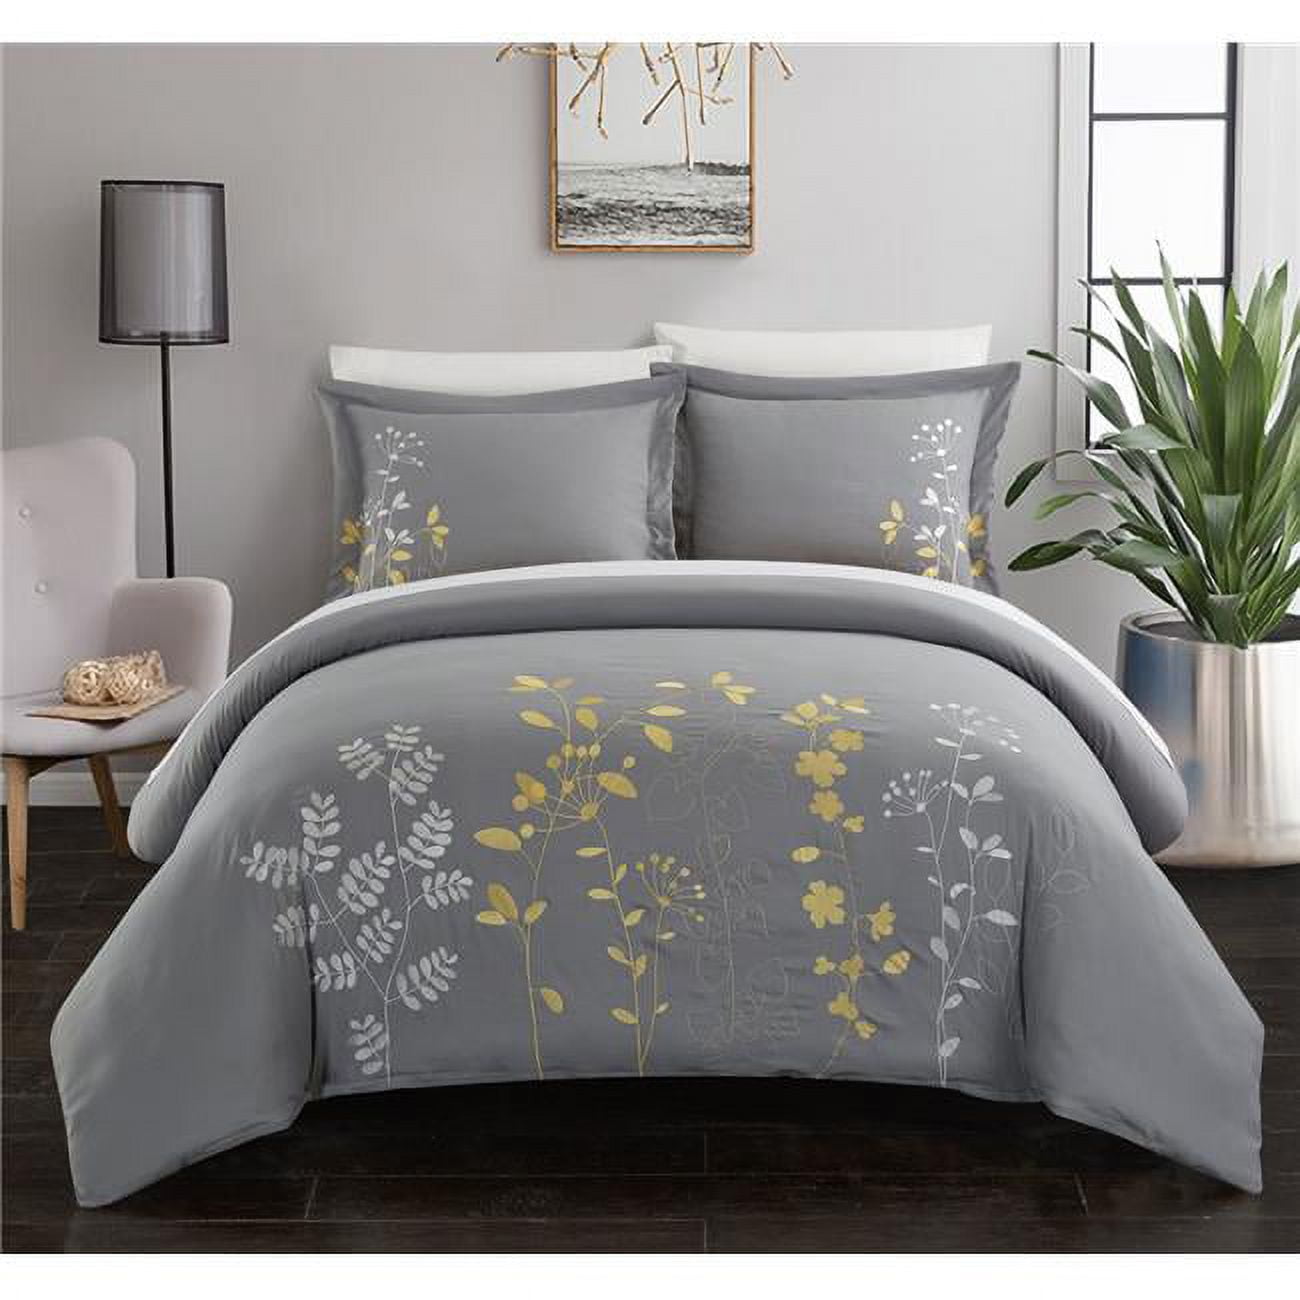 King Size Kylie Duvet Embroidered Floral Design Backing Zipper Closure Bedding & Decorative Pillow Shams Included, Yellow - 7 Piece